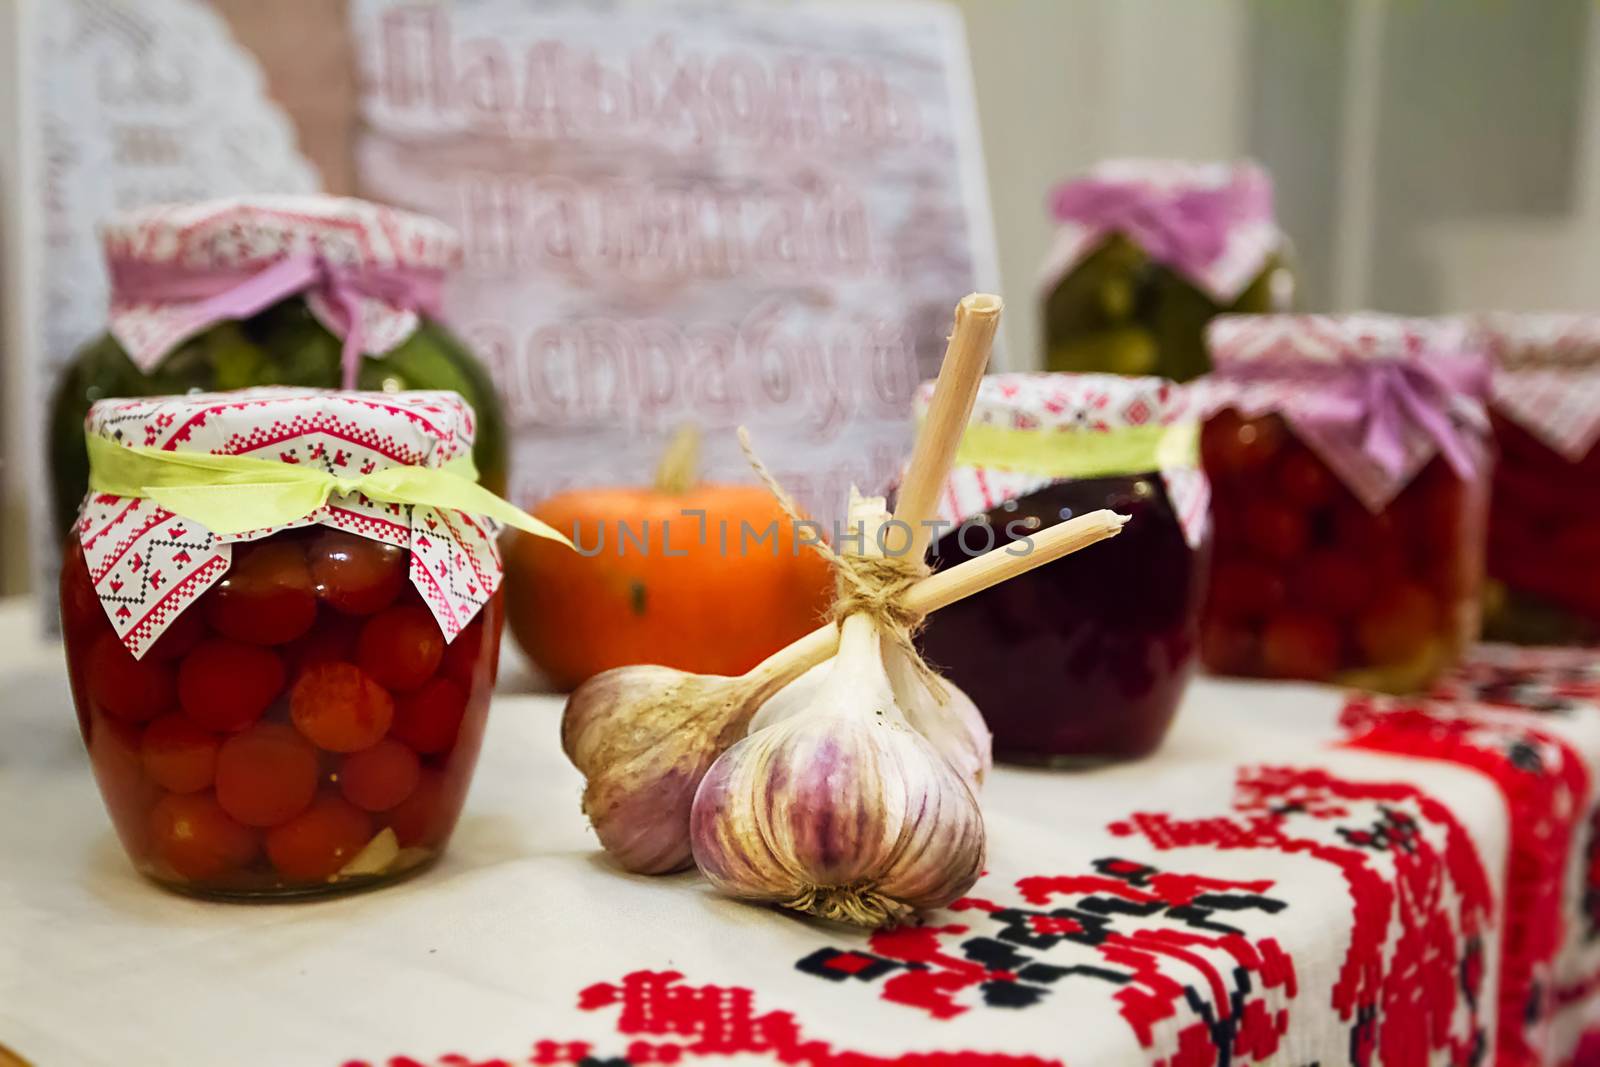 Preservation of vegetables. Canned tomatoes. Head of garlic. Belarusian products on the Belarusian towel. National Belarusian cuisine